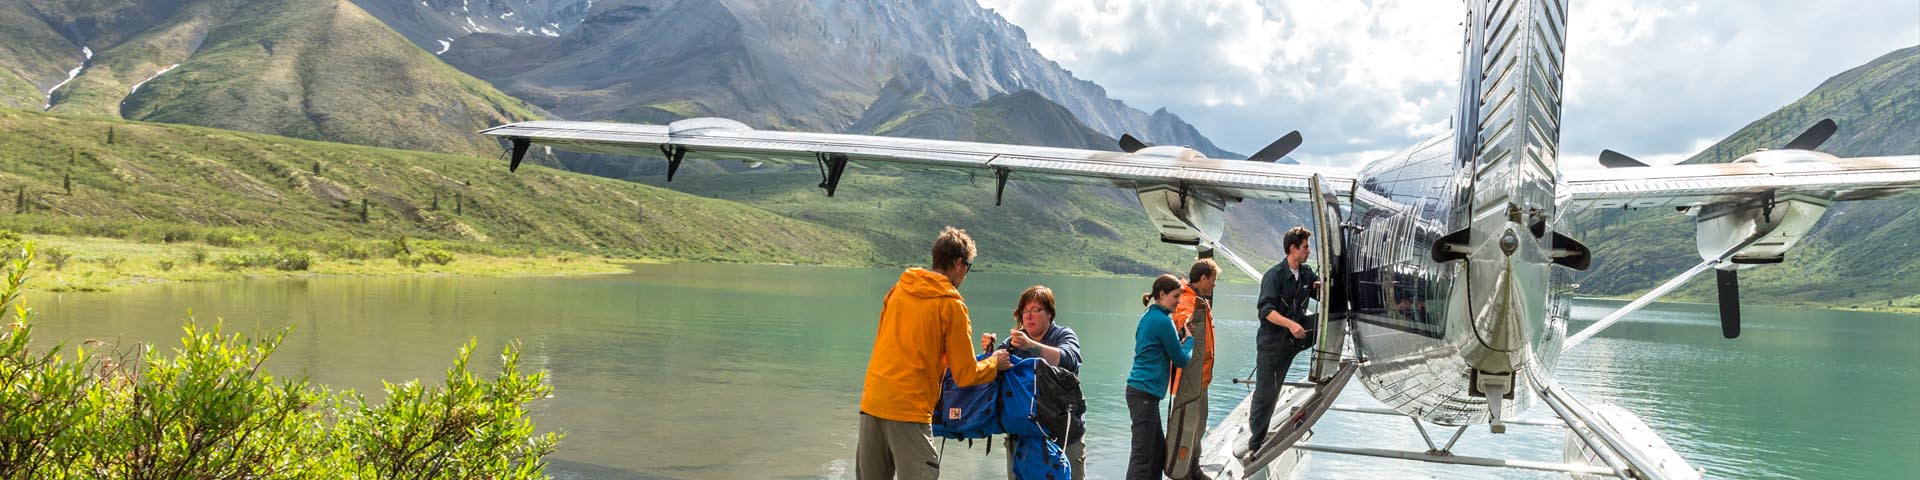 Five adults unloading camping gear from the float plane at Grizzly Bear Lake, in Nááts’ihch’oh National Park Reserve.